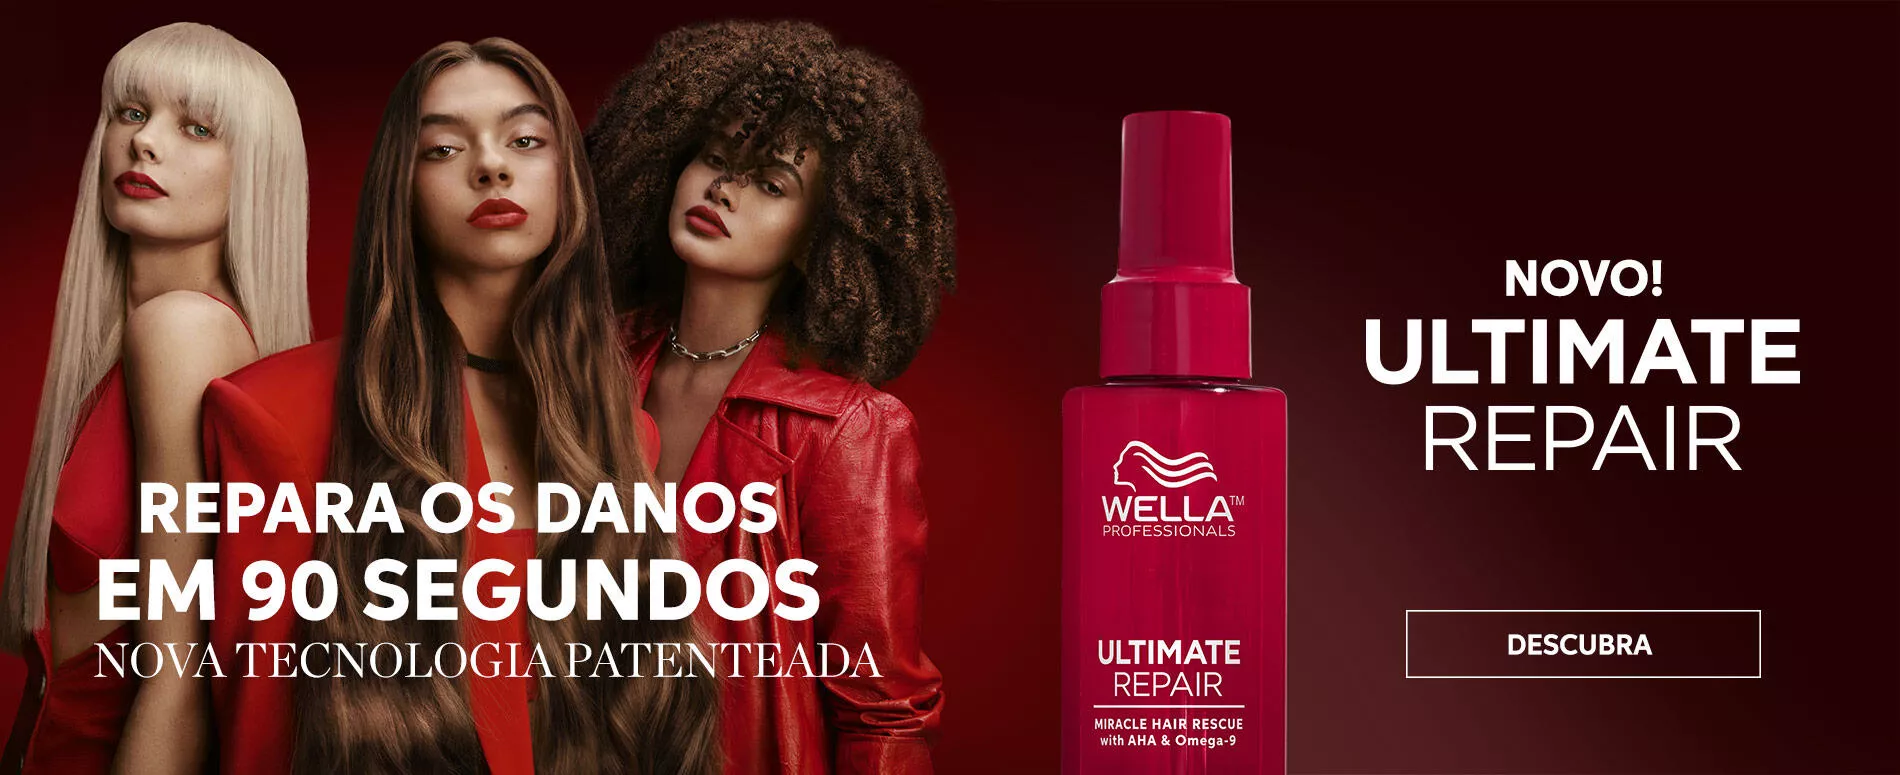 A close-up of Wella Professionals' Ultimate Repair product next to a blonde and two brunette models all dressed in red